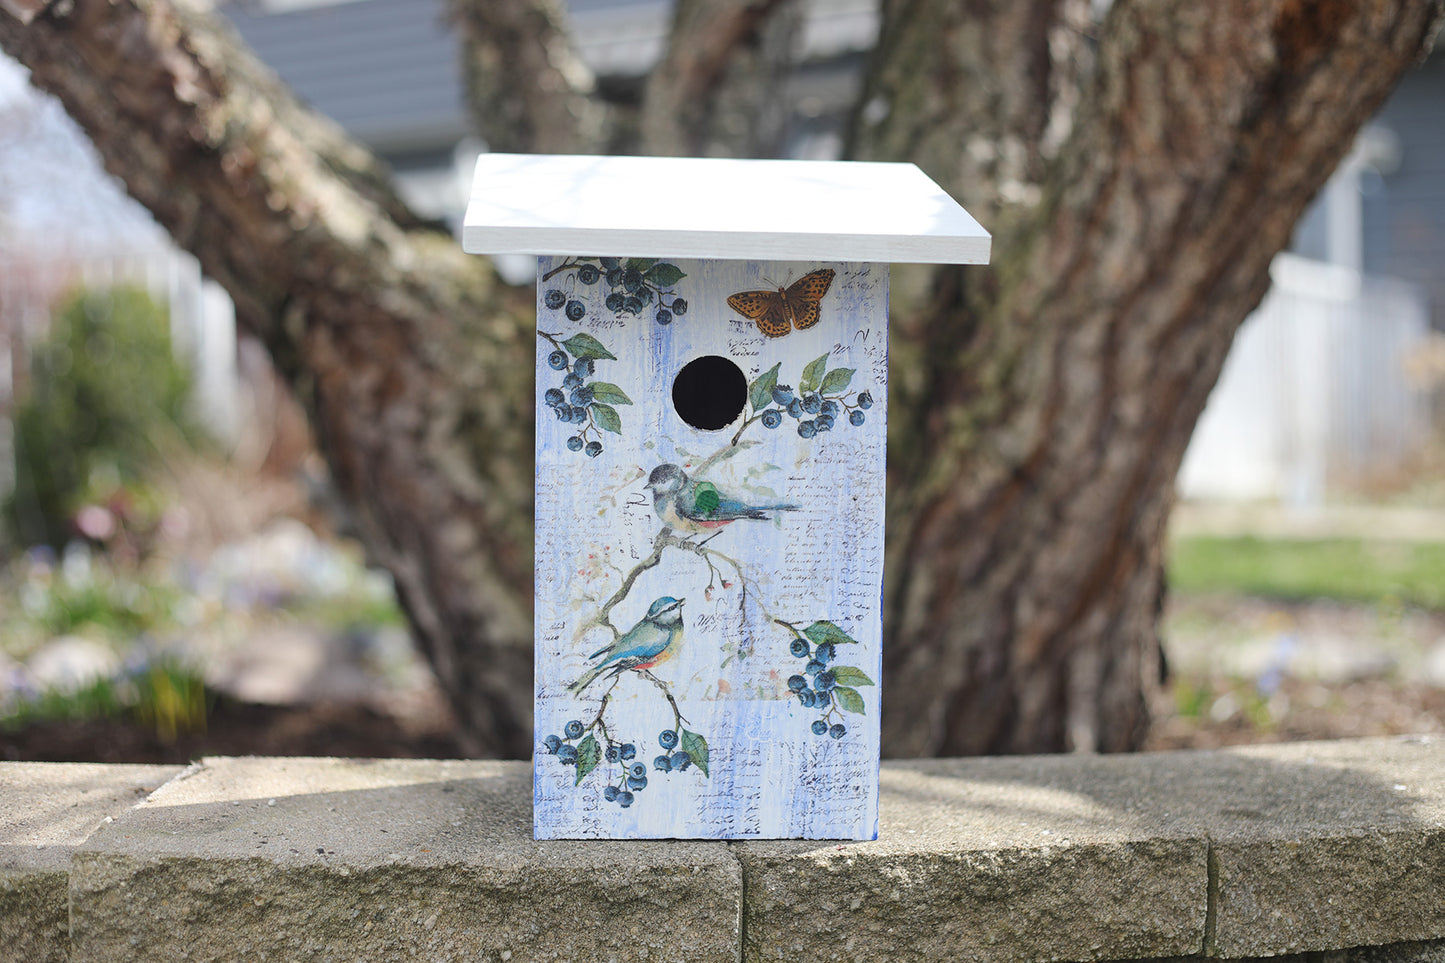 This adorable birdhouse is crackle painted with a blueberry and bird decoupage design and white roof. Constructed of weather and insect resistant cedar, wood glue and Polycrylic  sealer with easy bottom cleanout. Sure to make a great gift or addition to your back yard. 6 1/2"L x 5 1/4" W x 12 1/2" H.